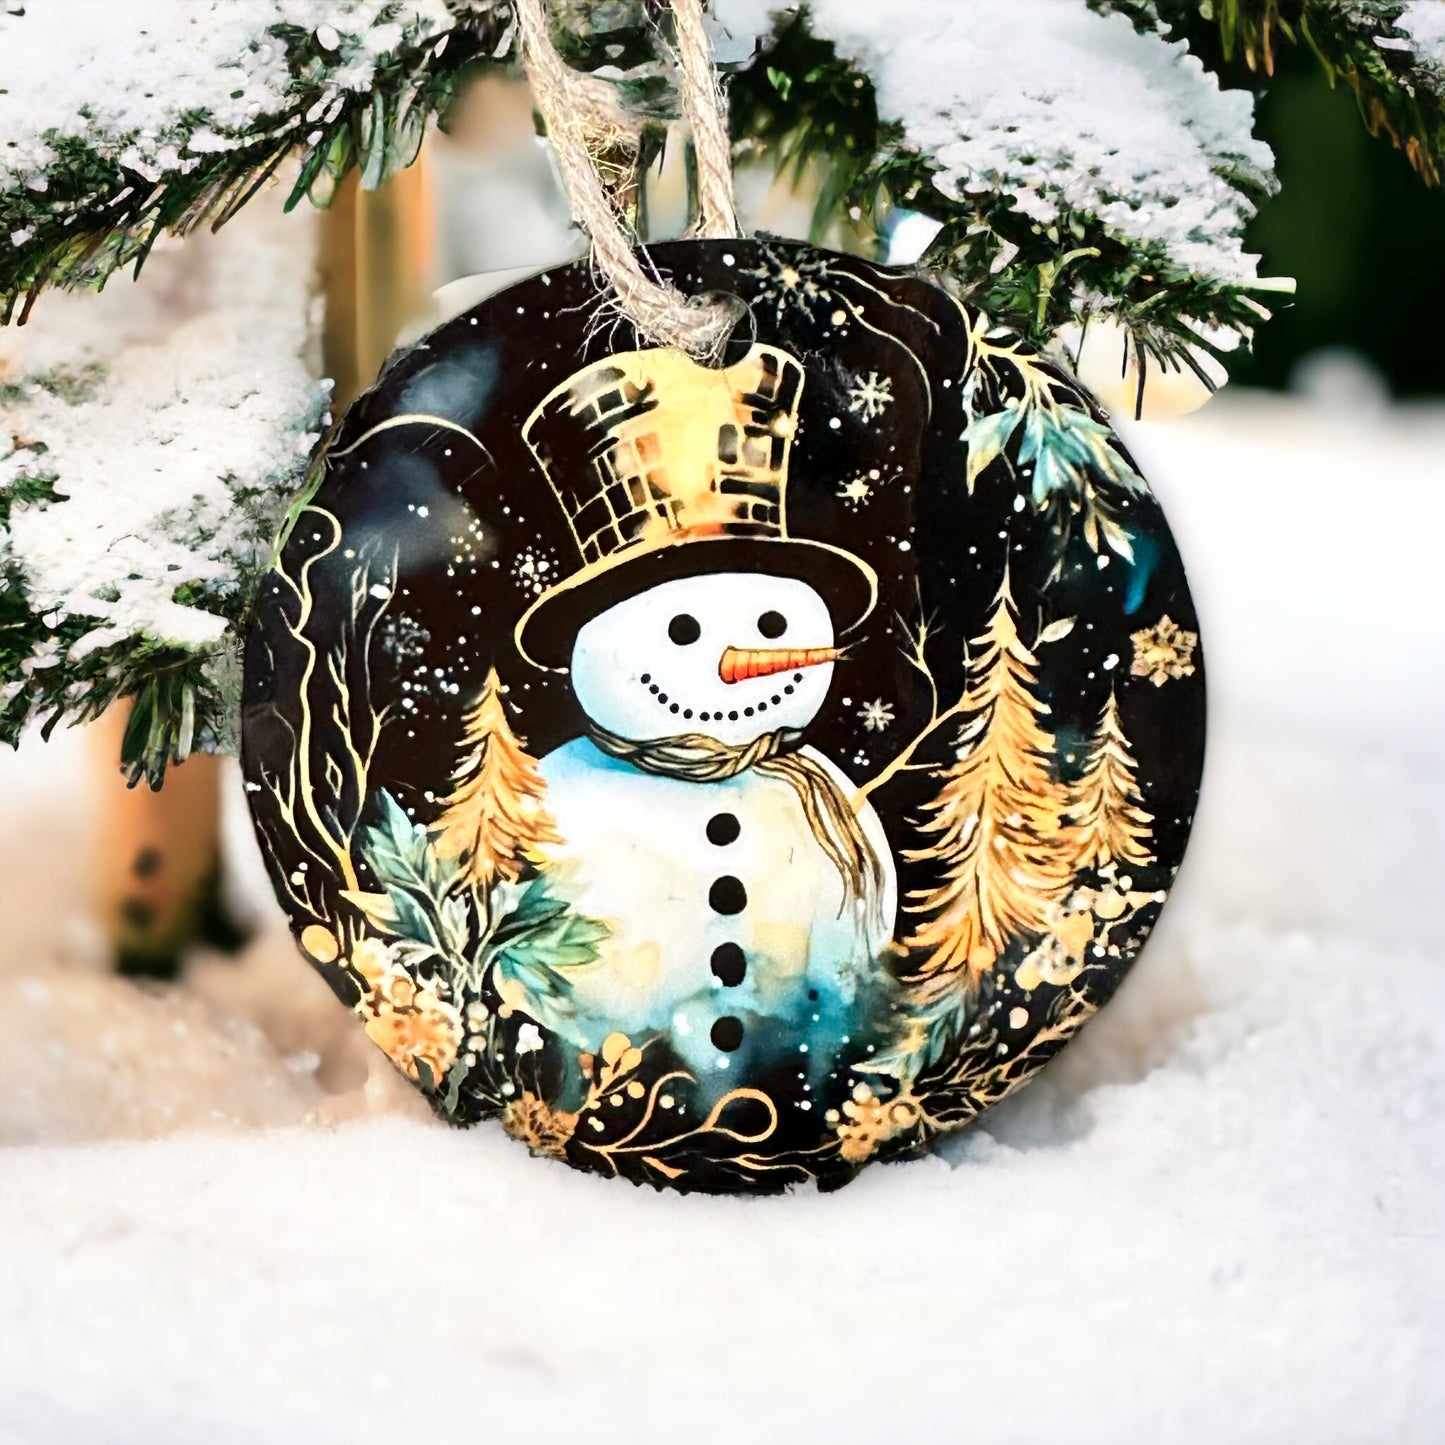 Snowman Christmas Ornament in Watercolor